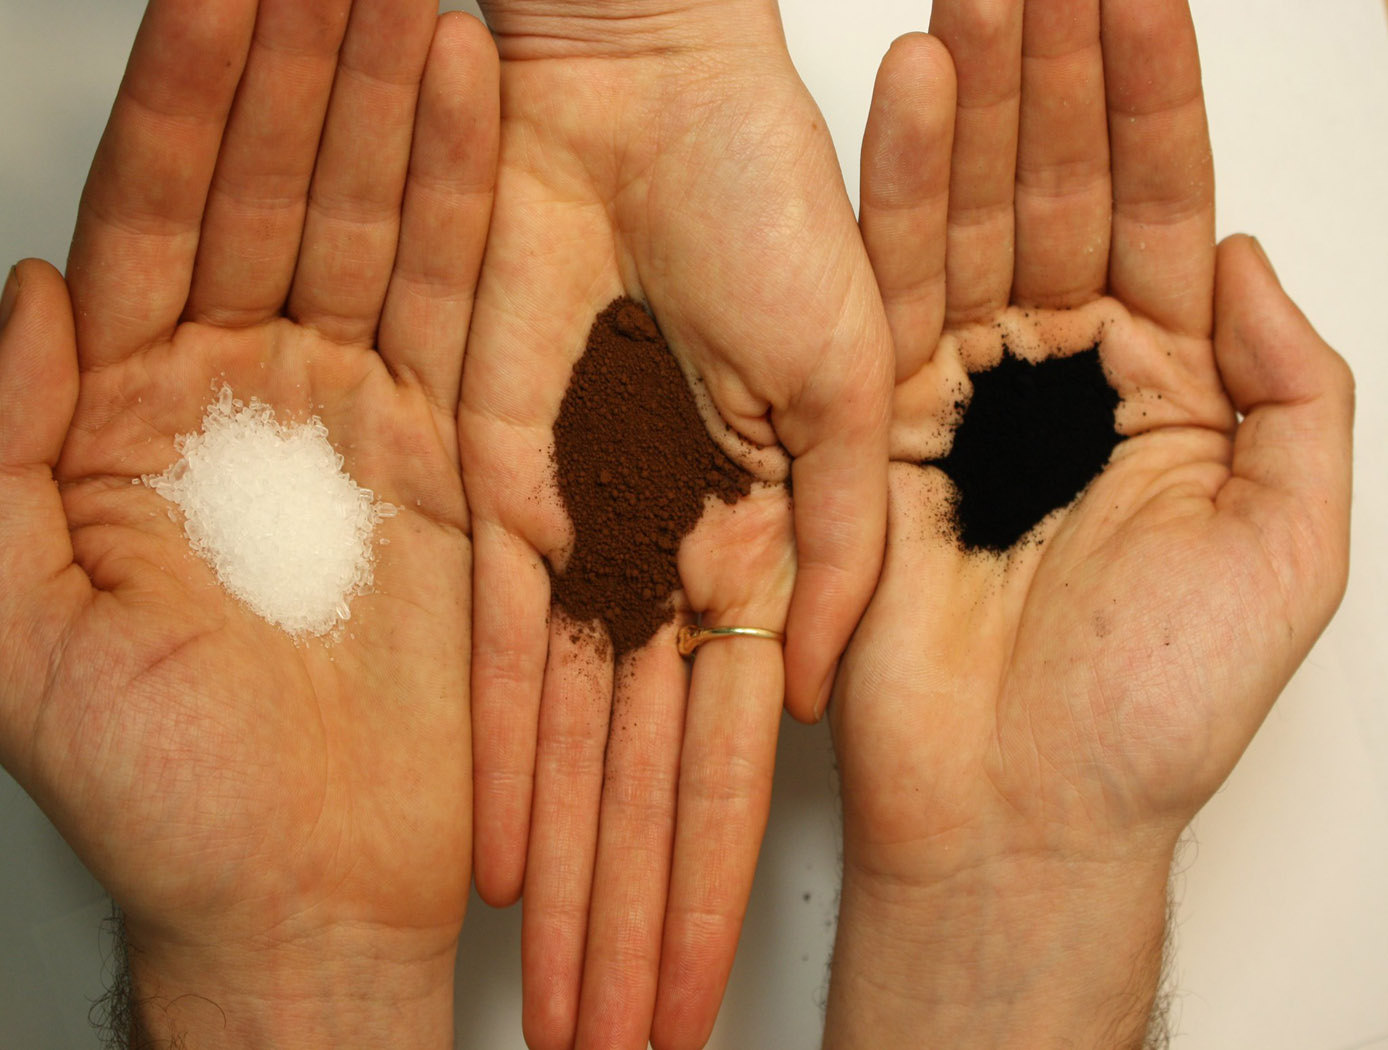 This image shows magnesium sulfate from epsom salt (left), iron oxide containing manganese from an artist pigment (middle), carbon black from an artist pigment (right).